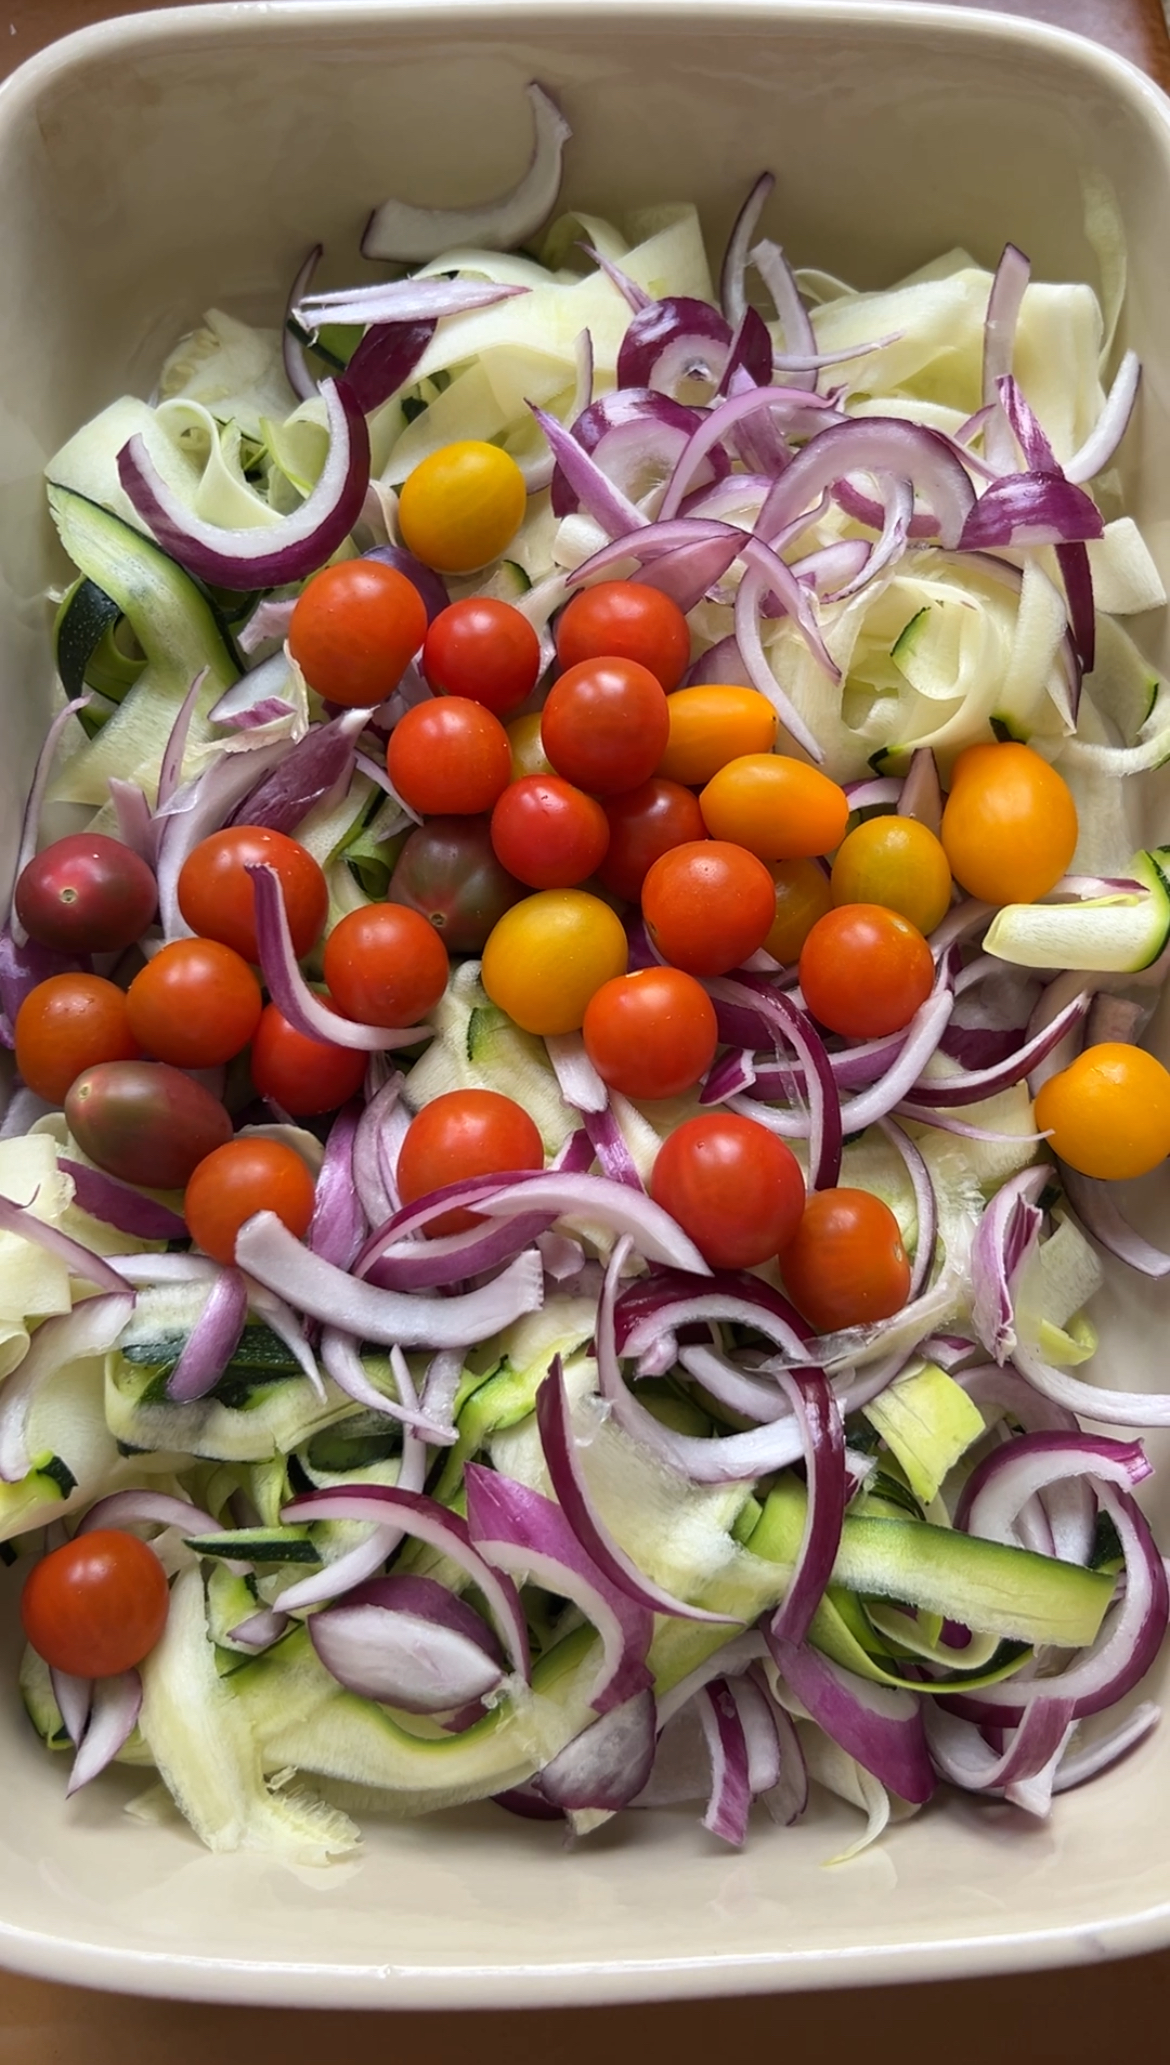 Zucchini tagliatelle, red onion strips and cherry tomatoes are in a large ovenproof dish.